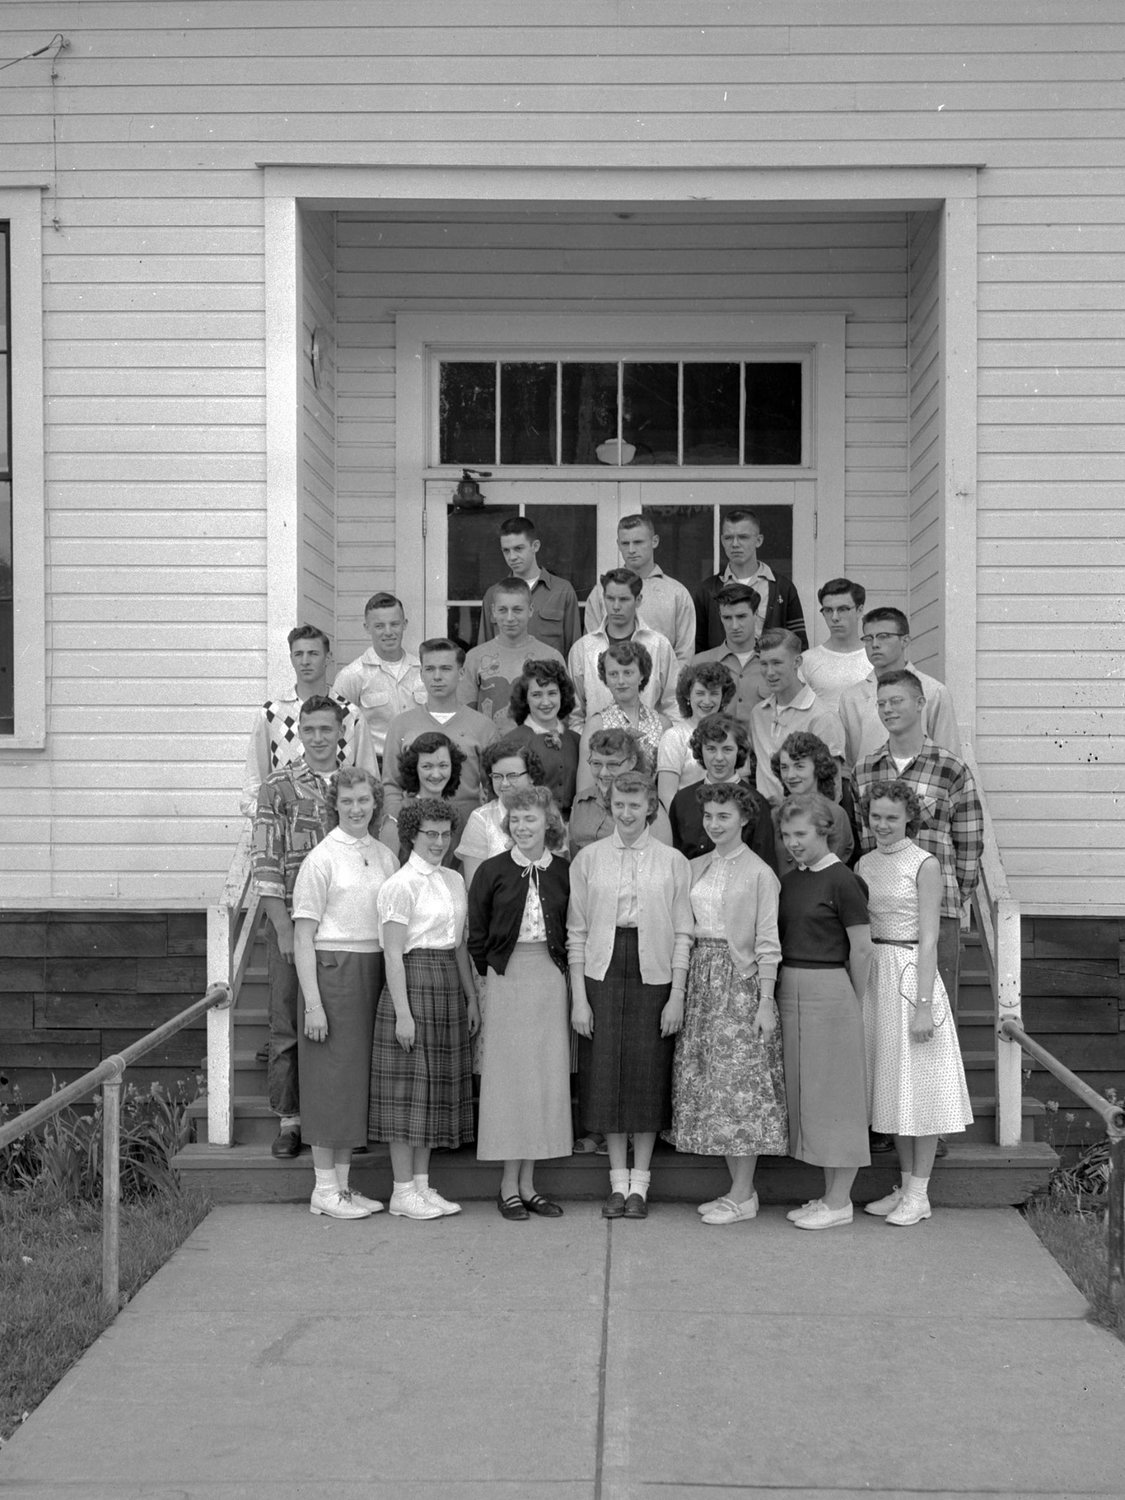 Onalaska seniors are pictured in 1955 in this photograph from The Chronicle’s archives.